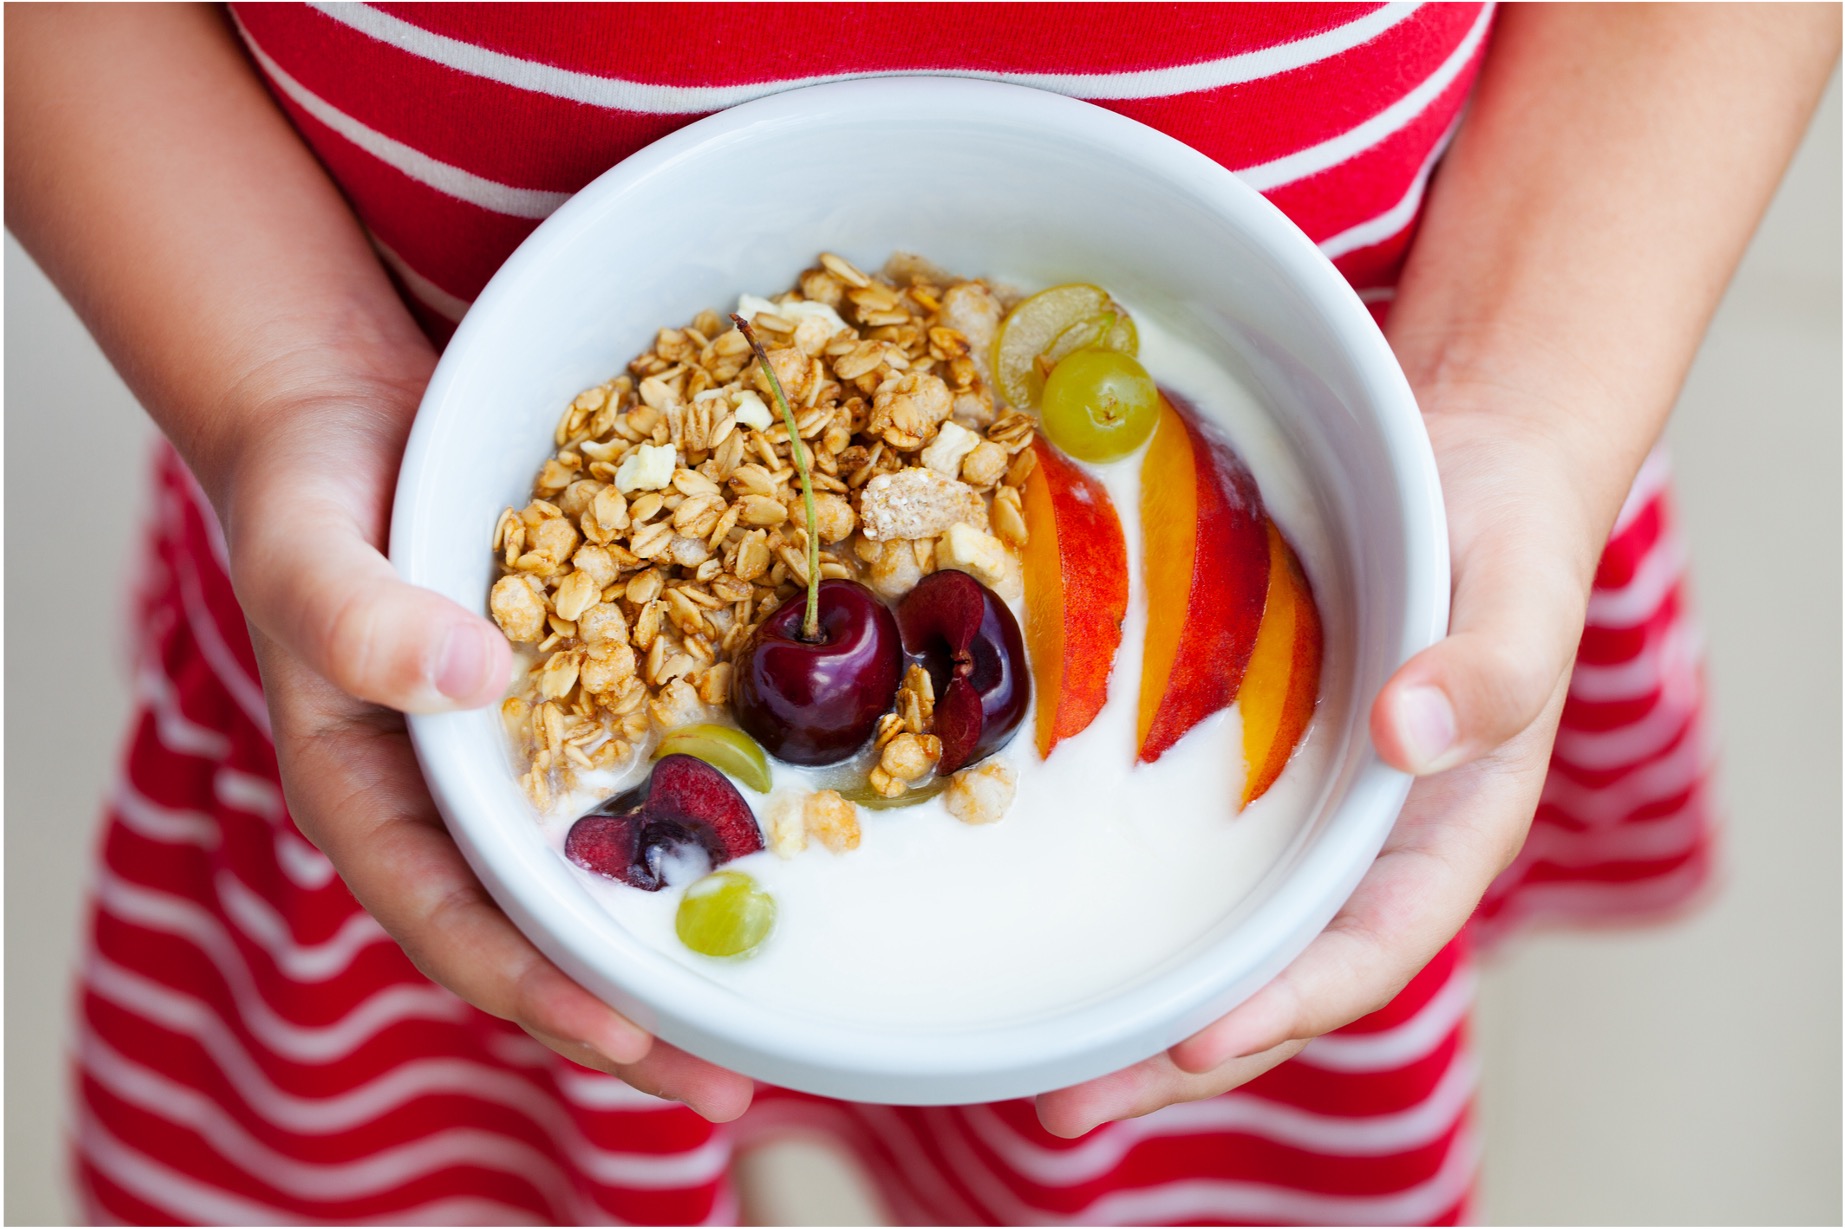 A child in a red and white striped dress holds bowl of granola and fruit